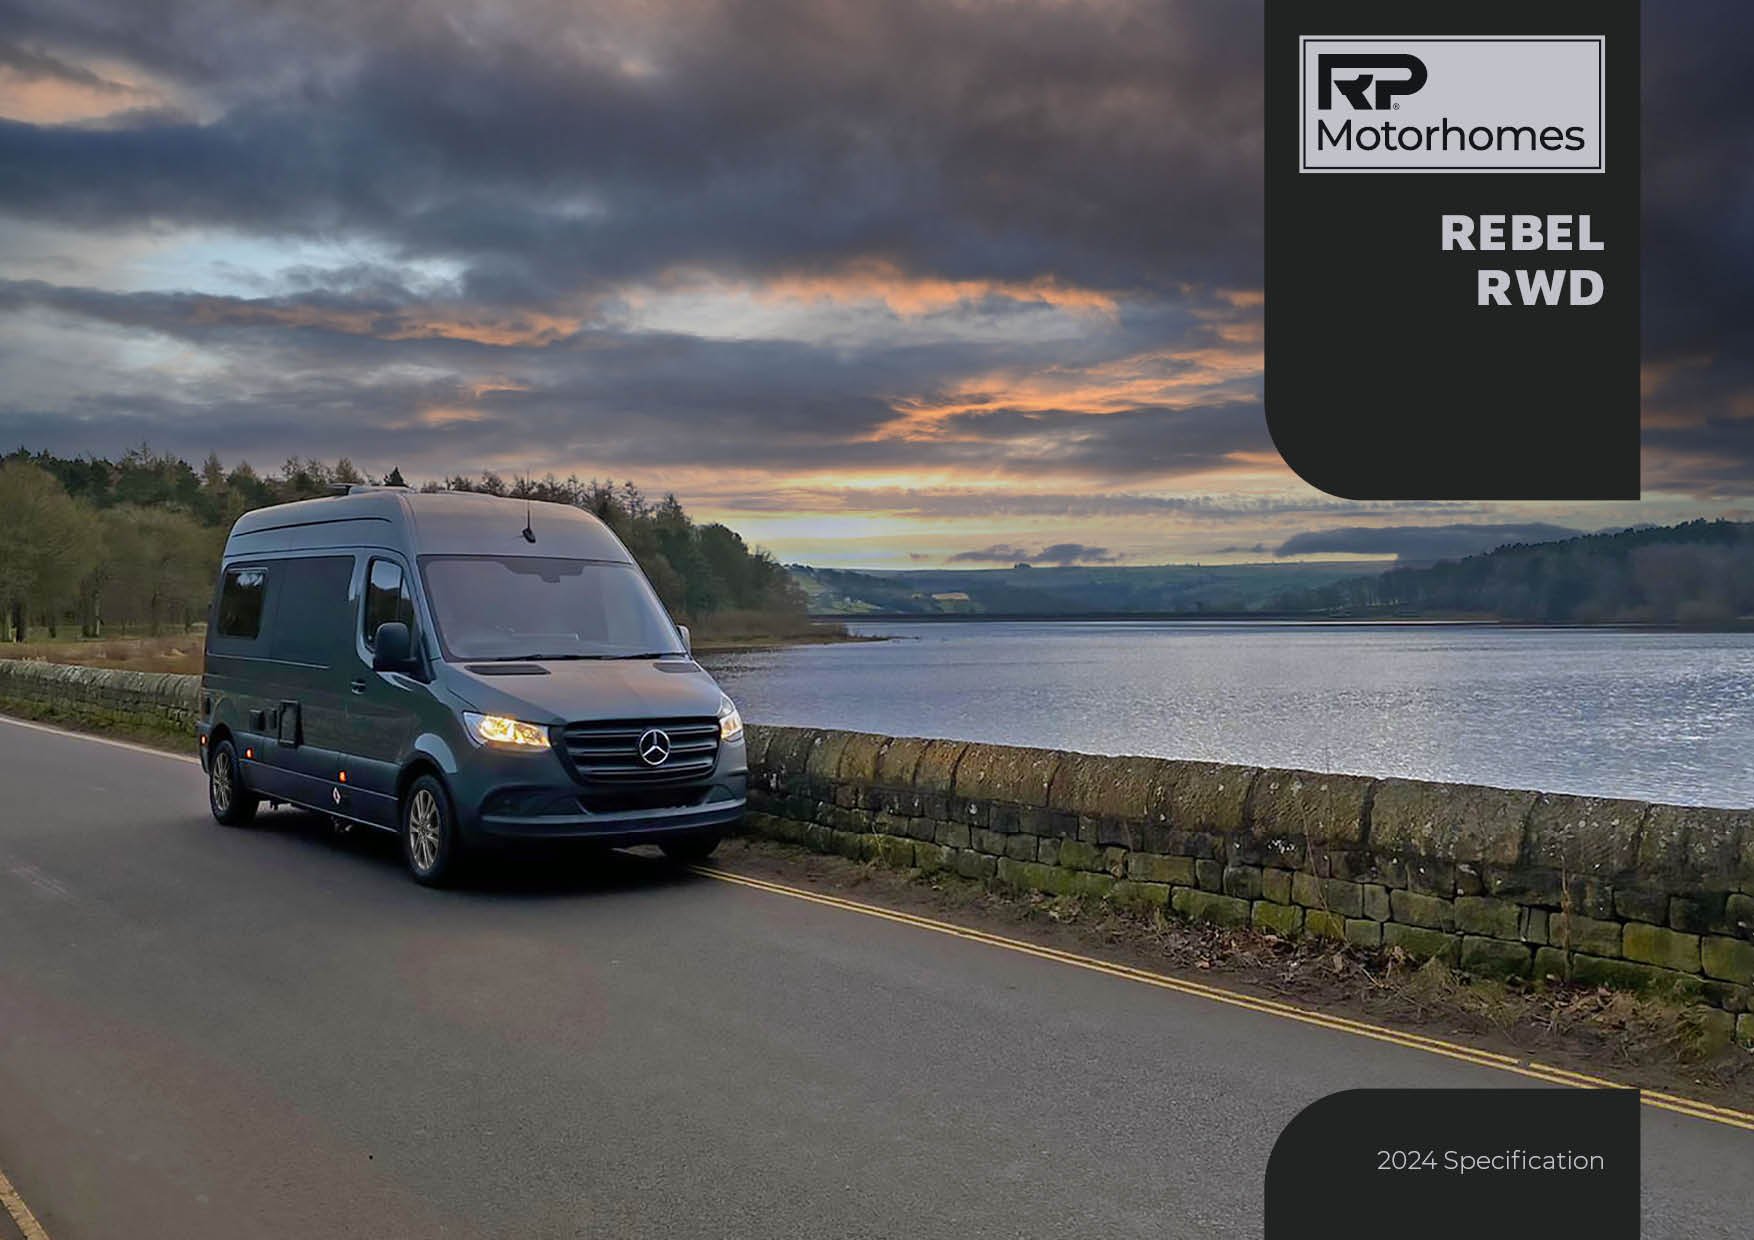 This Go-Anywhere Mercedes-Benz Sprinter Camper Van Is As Capable